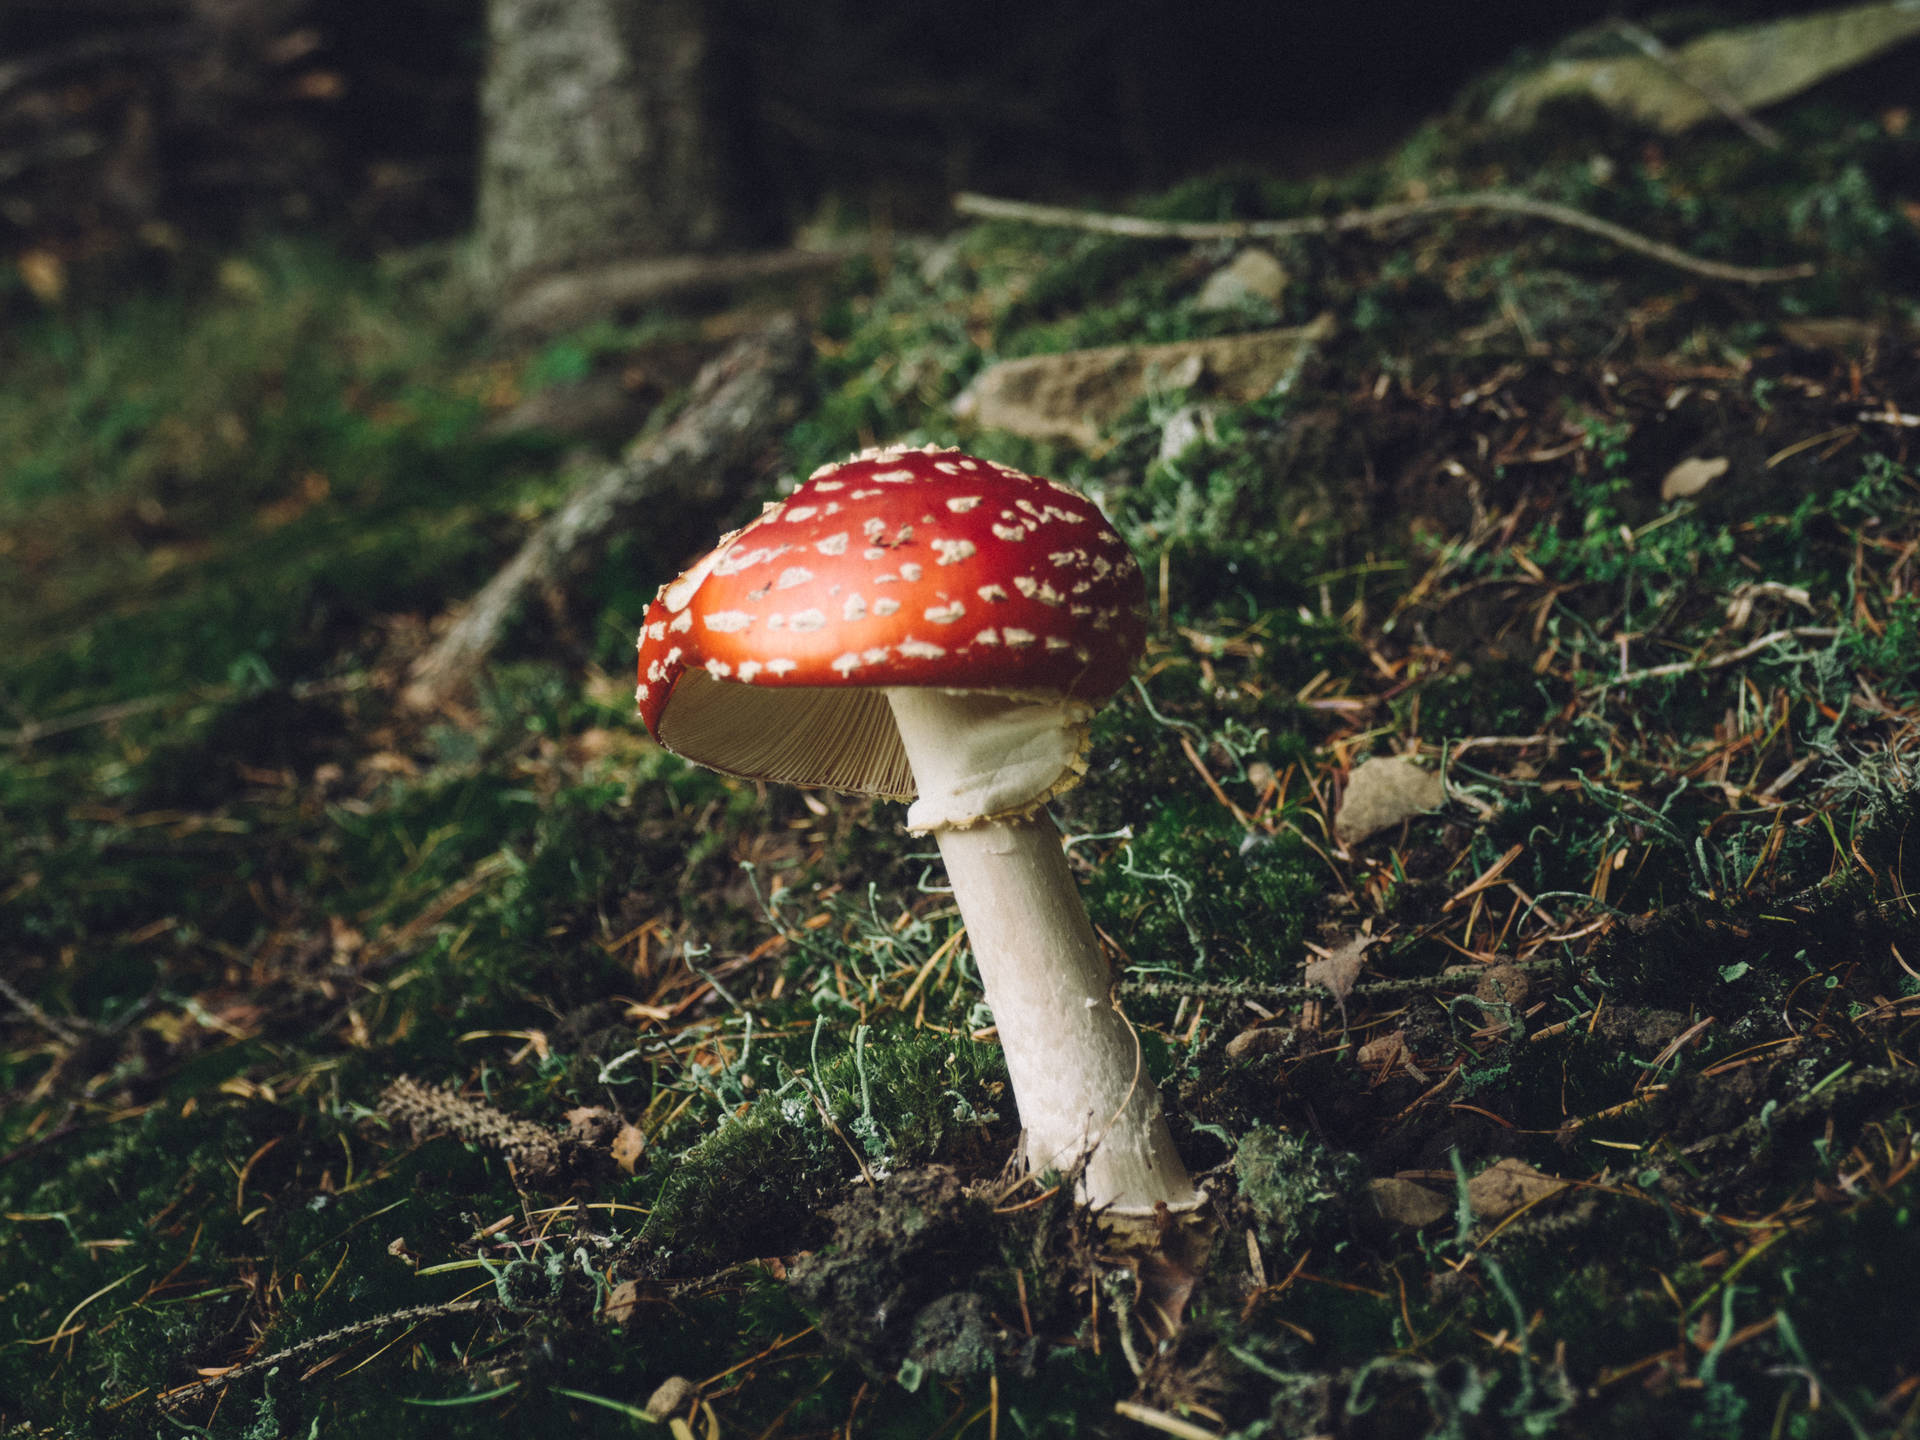 Cute Red Mushroom With Tall Stalk In Forest